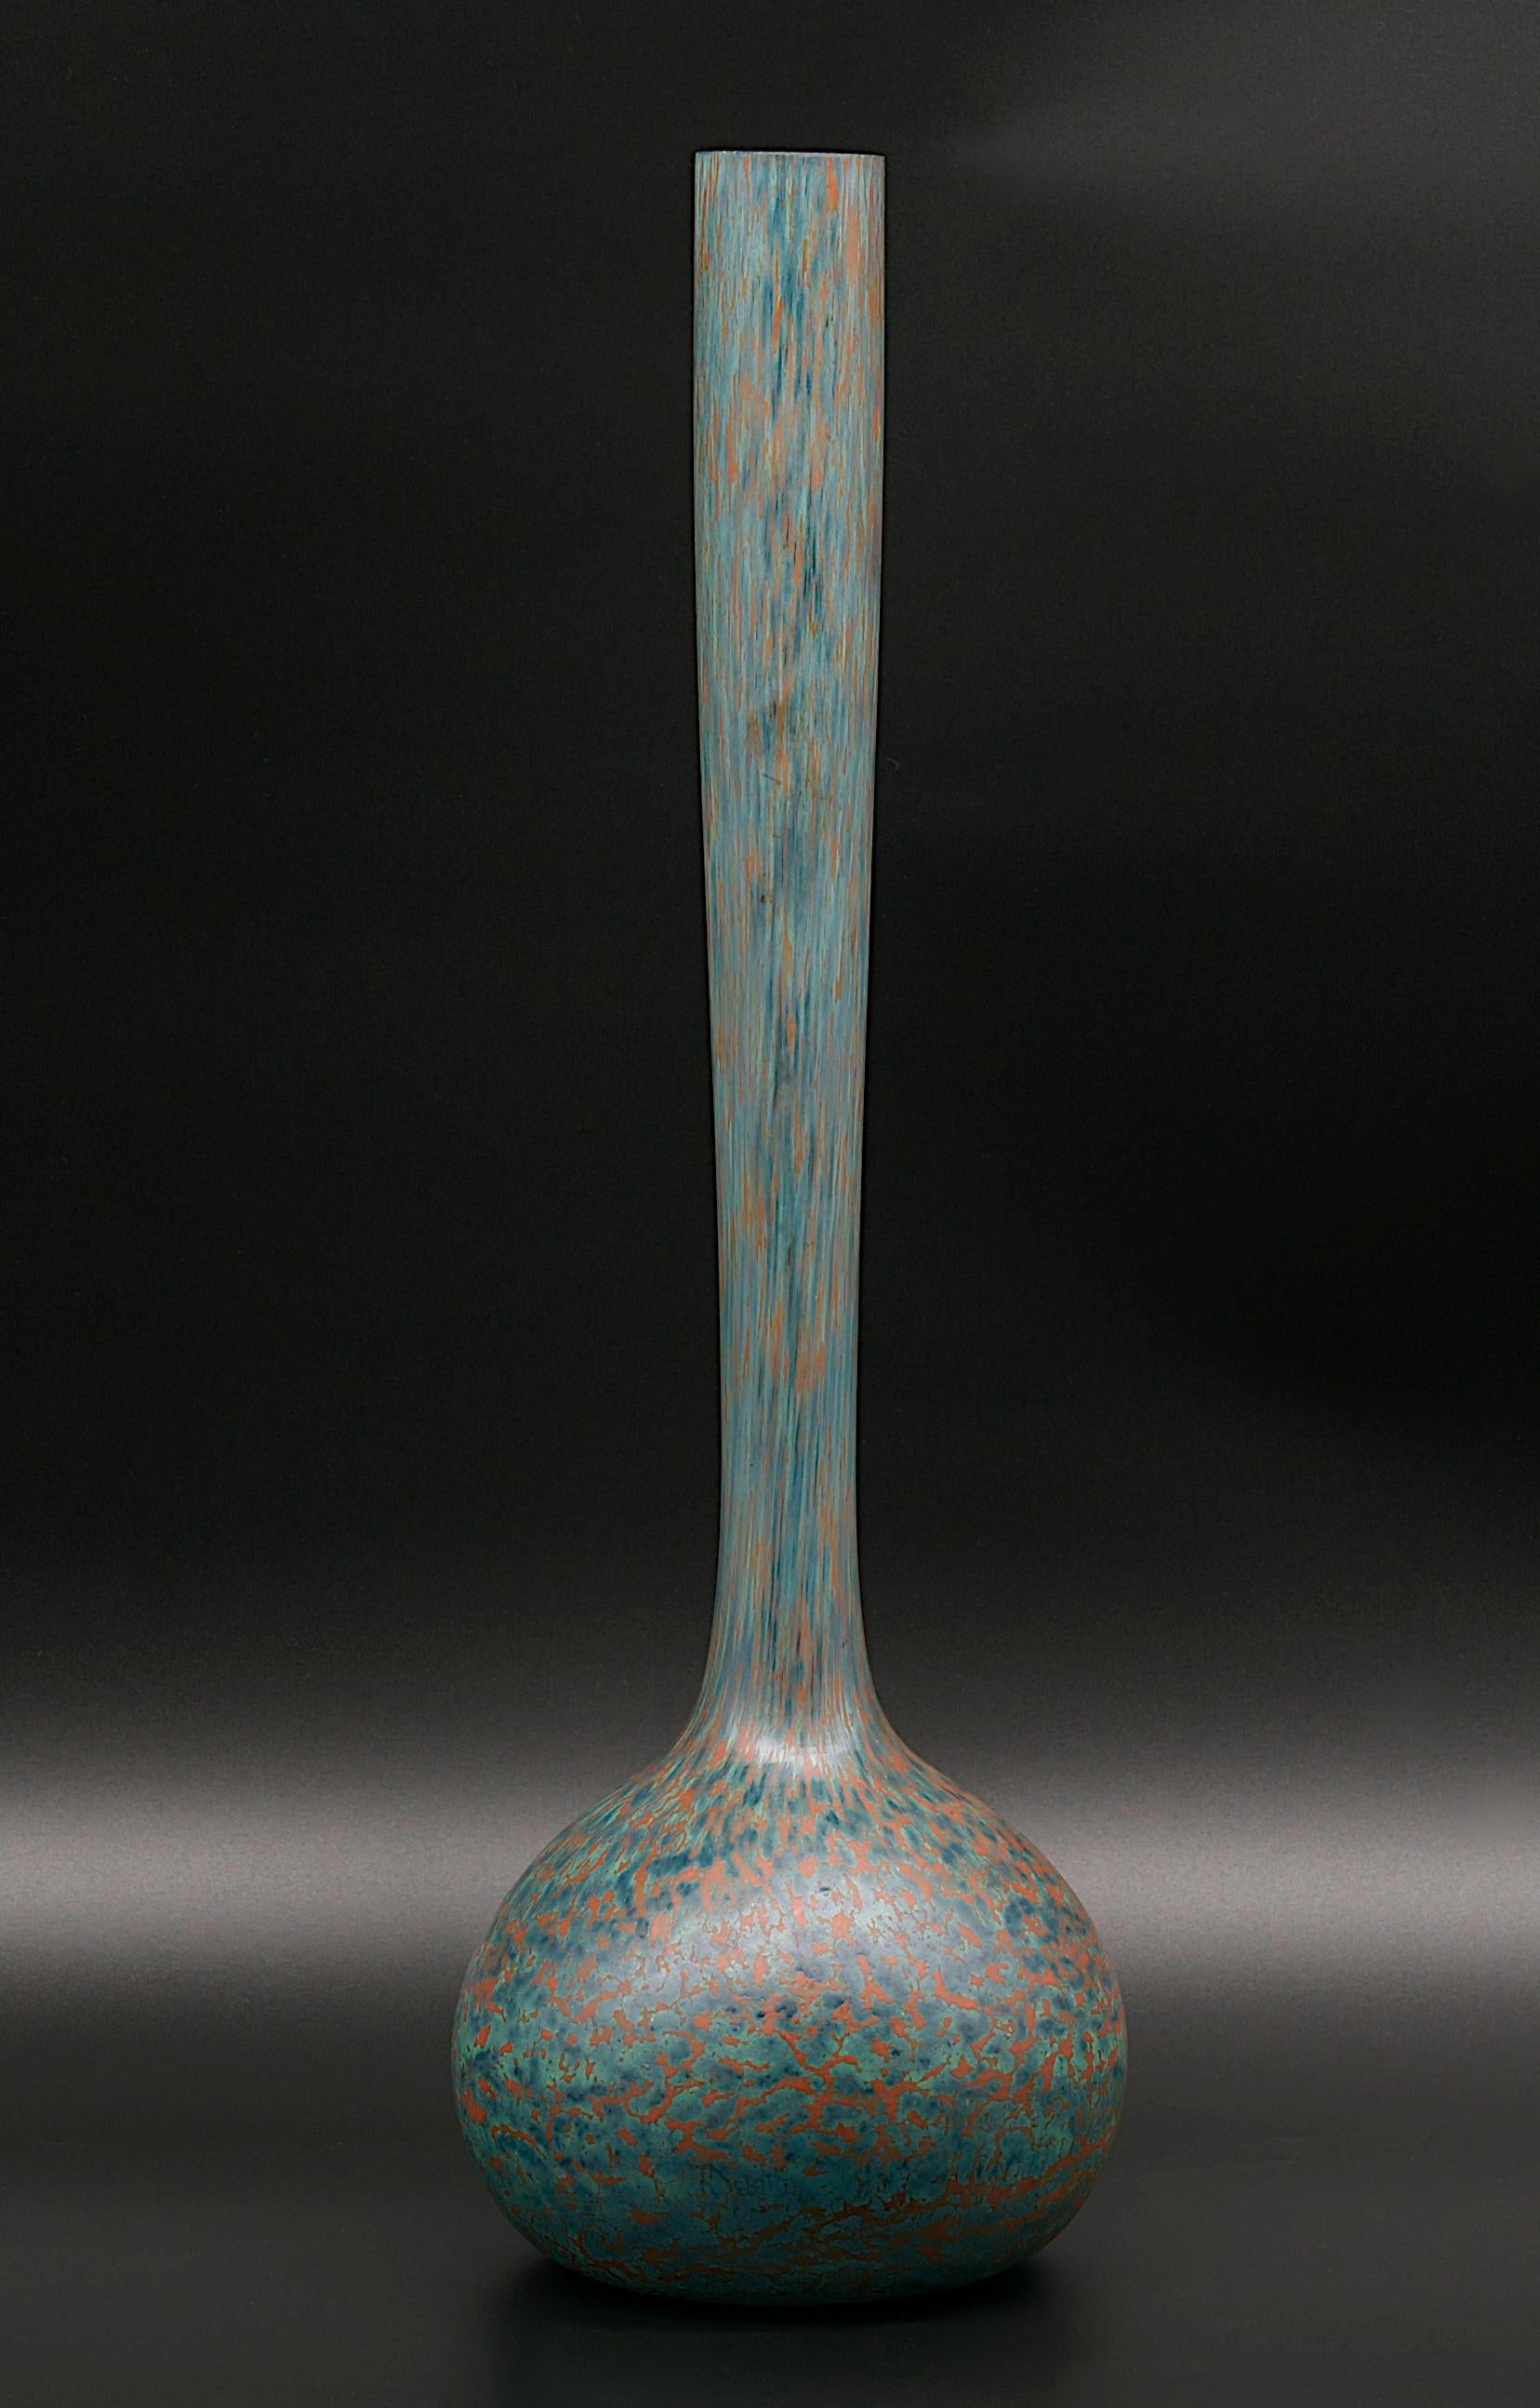 French Art Deco single-flower vase called berluze by Andre DELATTE (Jarville, near Nancy), France, late 1920s. Mottled double glass. Enamels are applied between the two layers. Height : 18.7